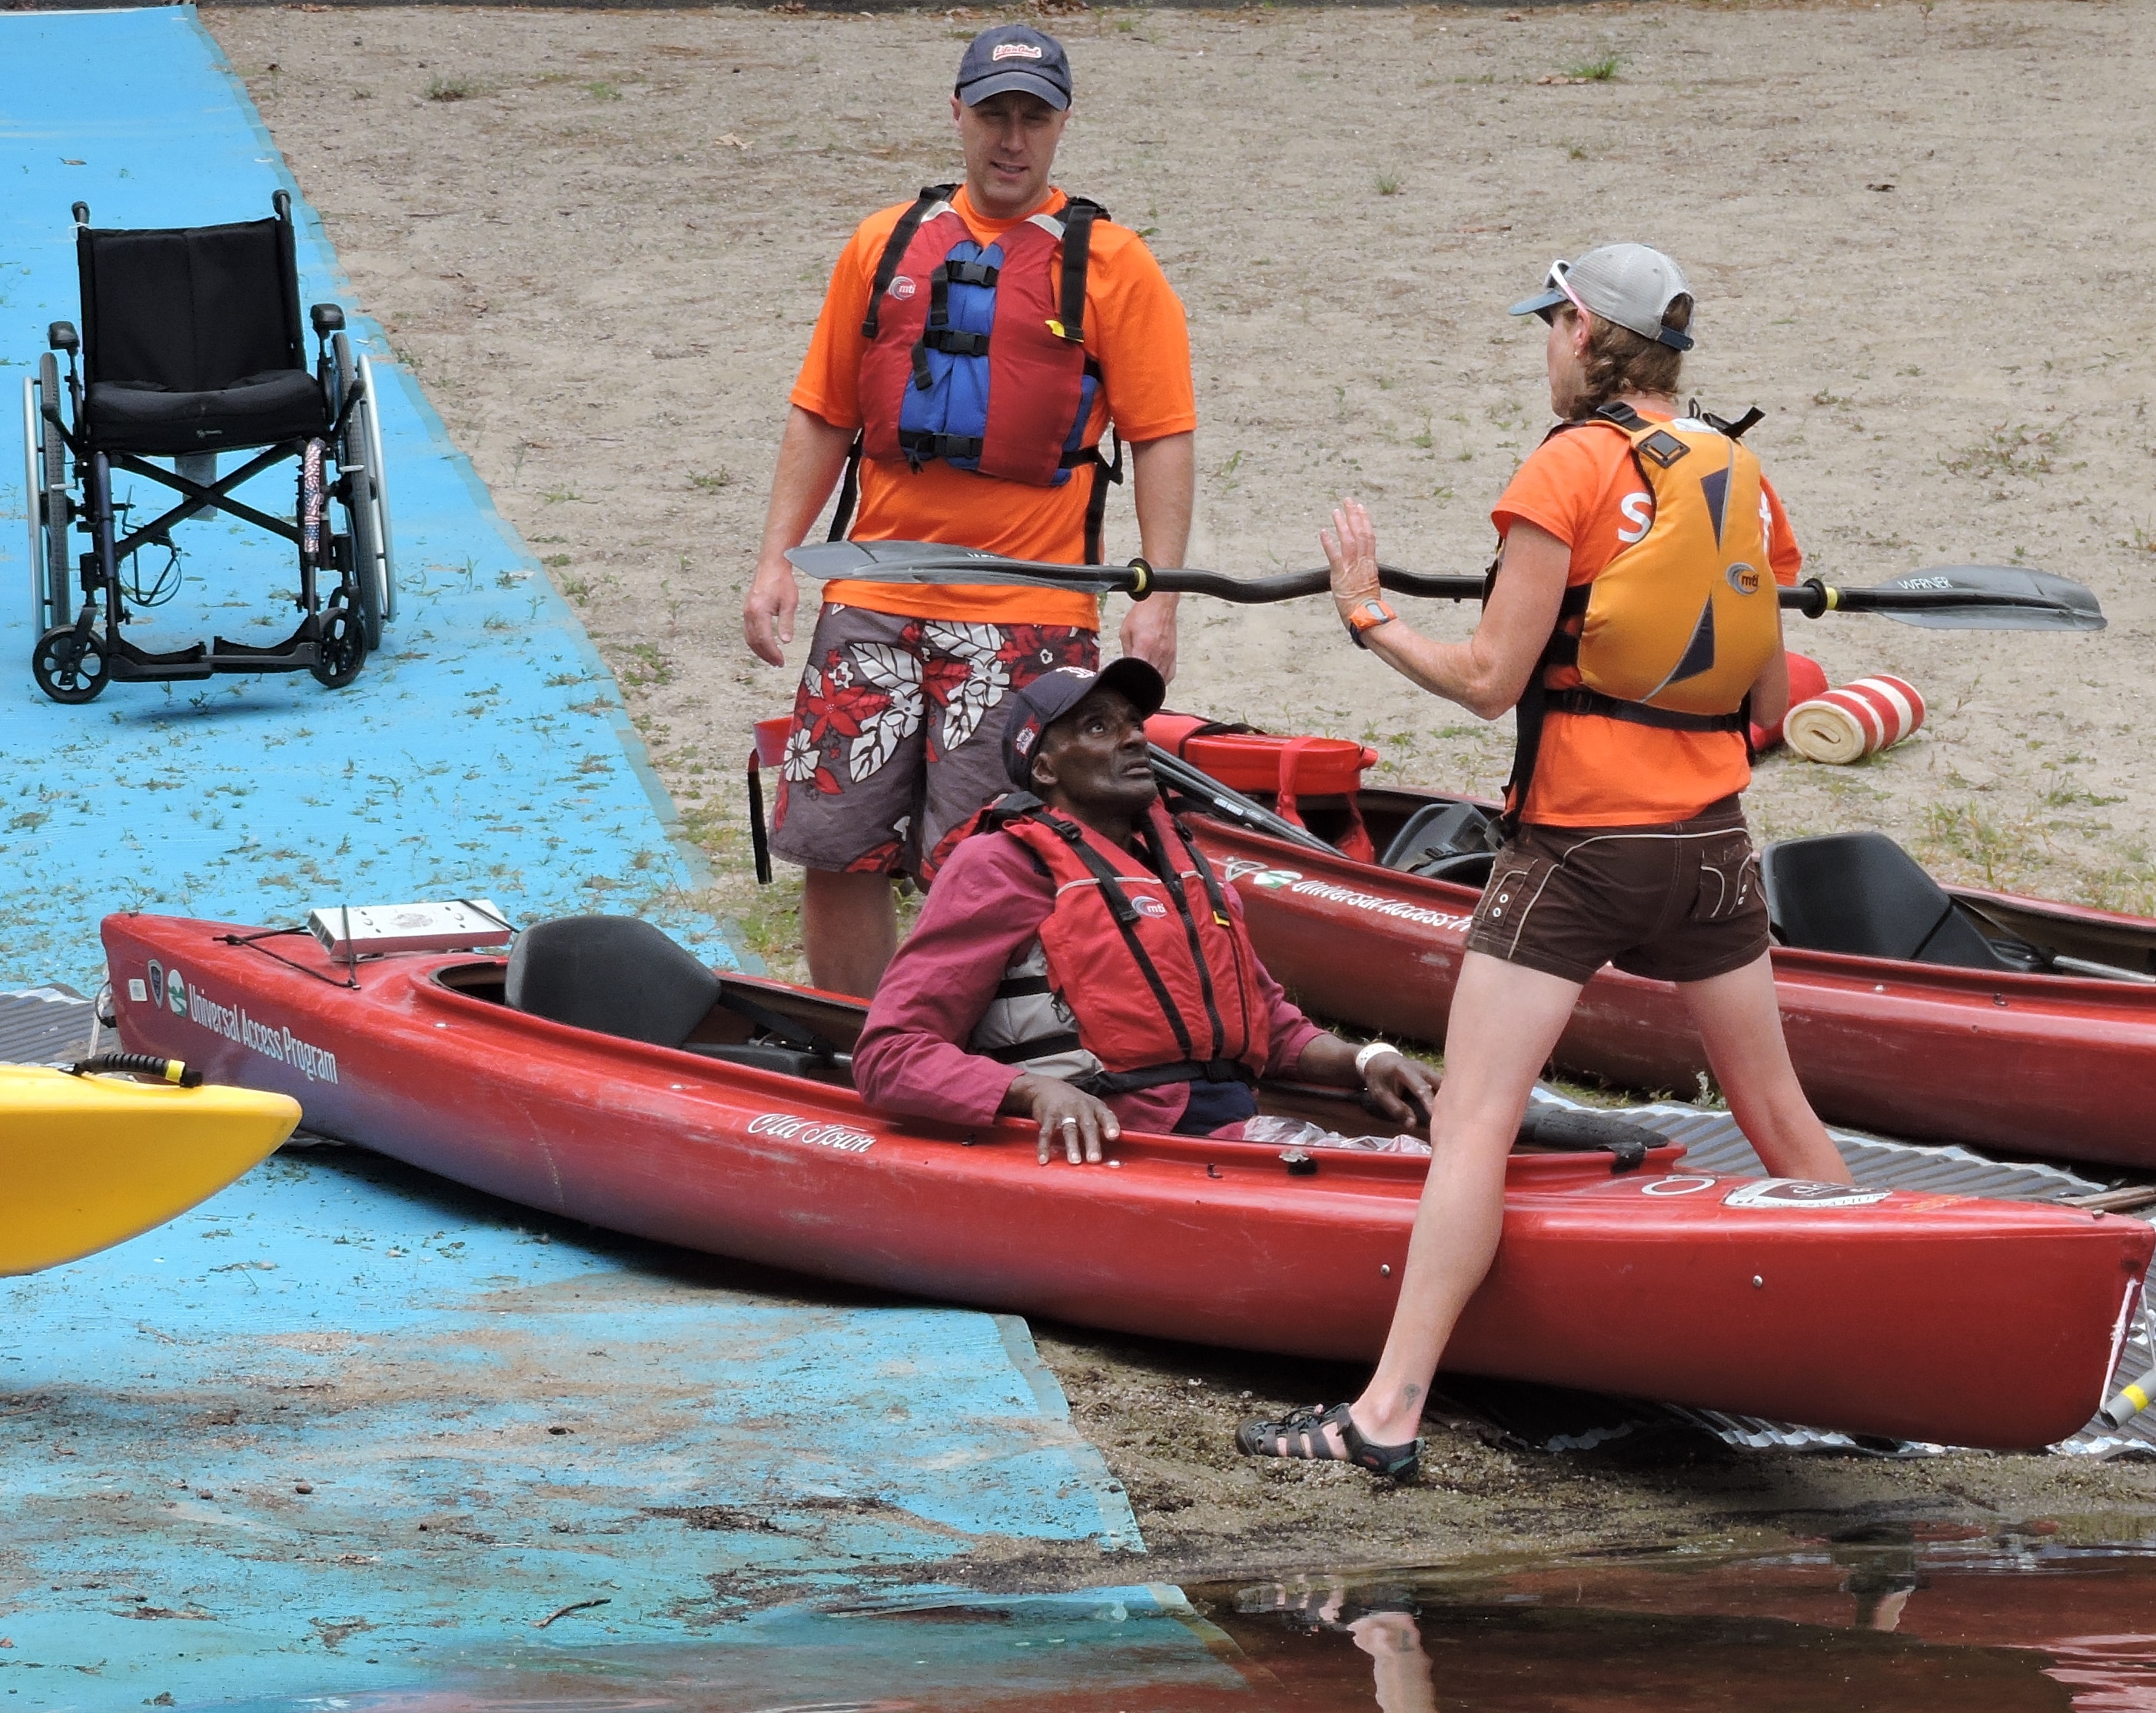 One paddler is sitting in a tandem kayak while another stands on the beach. An instructor is straddling the kayak and holding up a paddle. A beach mat with a wheelchair on it leads down to the kayak.